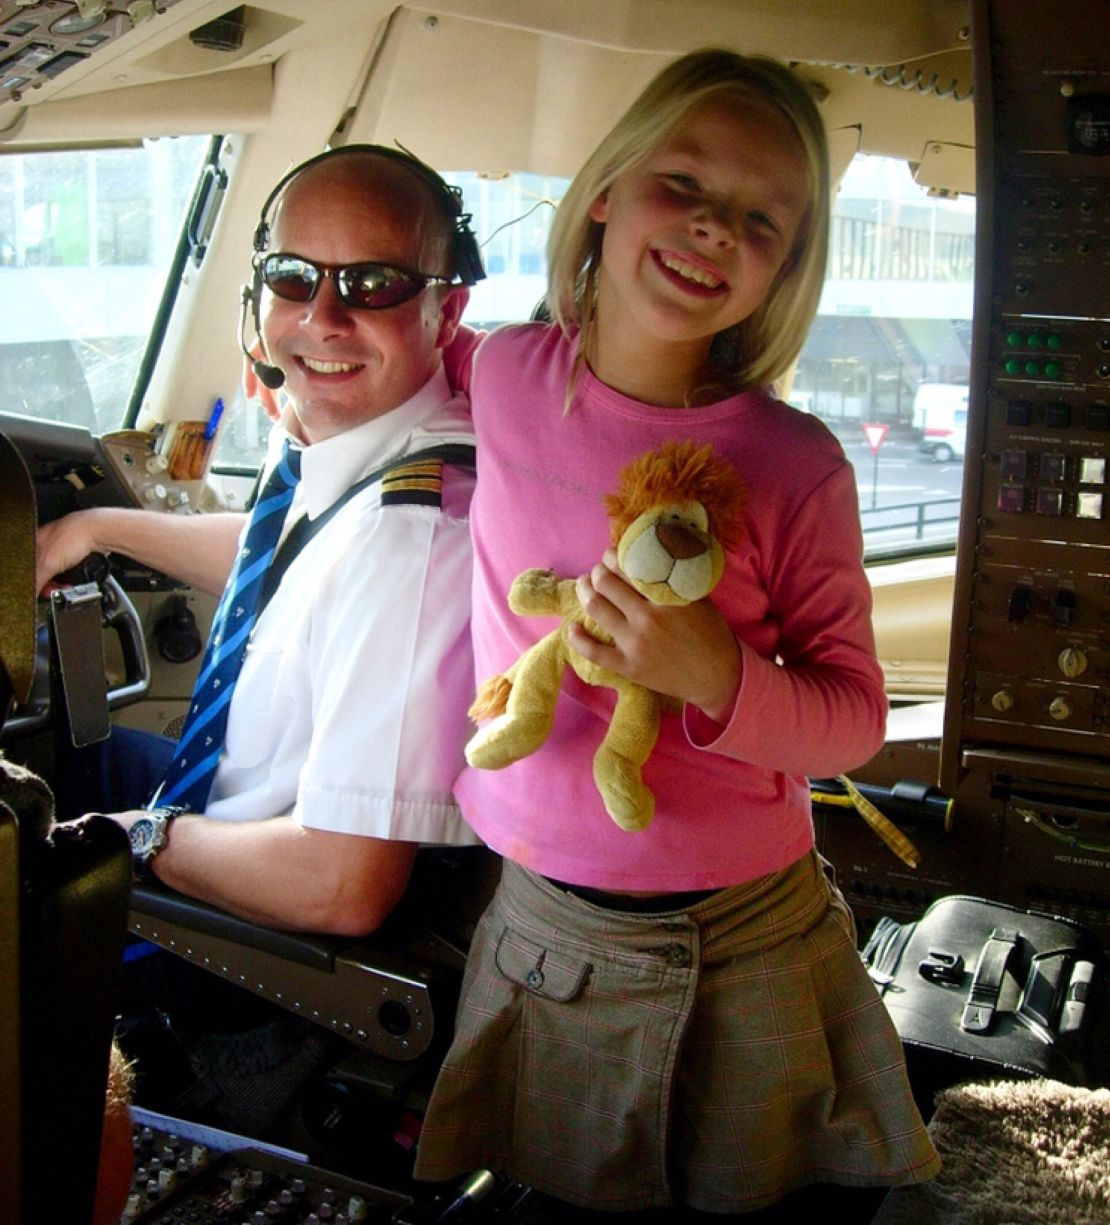 The 2006 photo was taken en route to Uganda. Jorrit and Jasmijn are pictured smiling together in the cockpit.